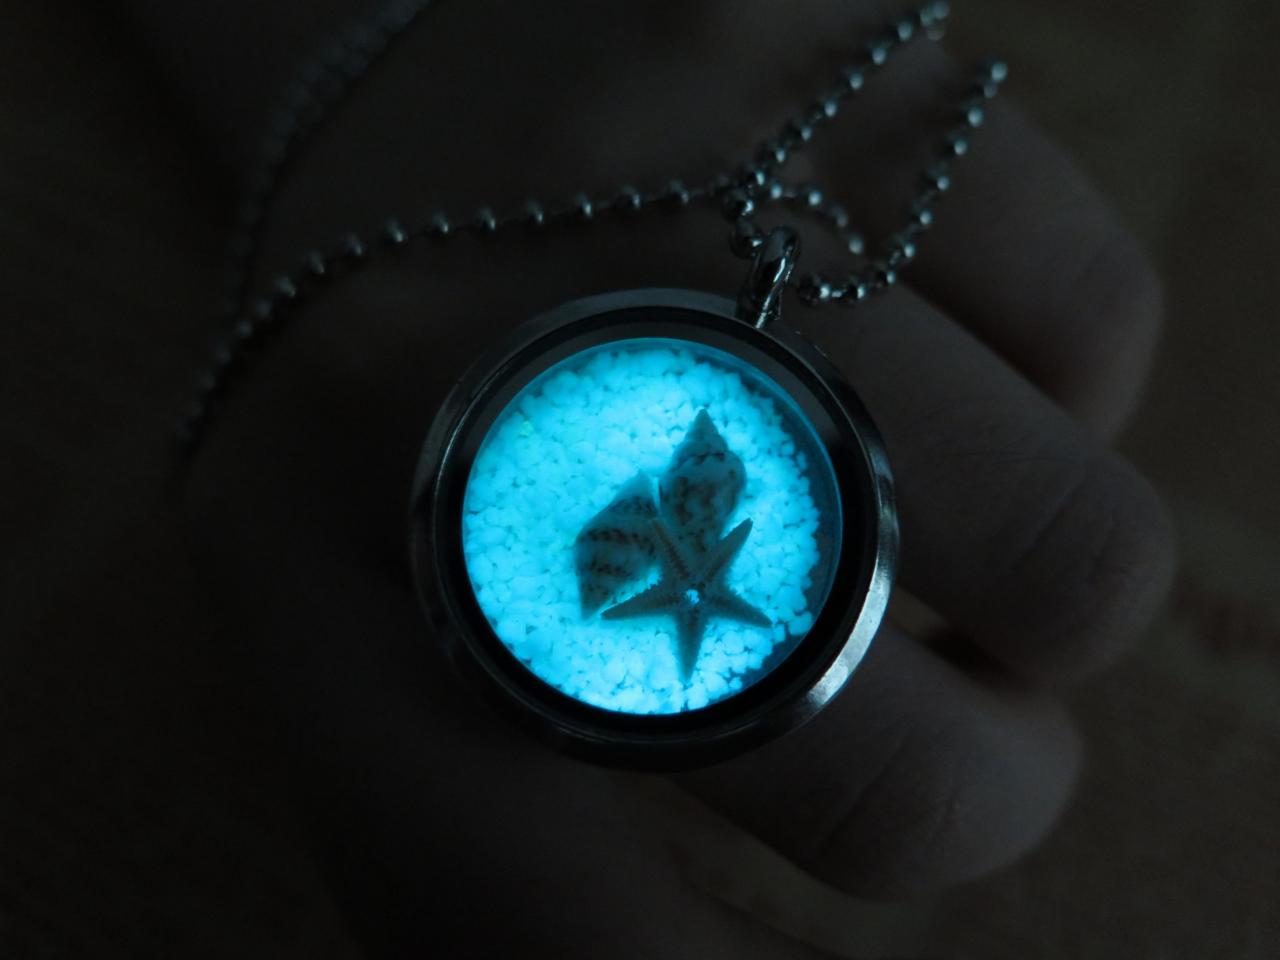 Free shipping Cyan Sea World, the marine's heart, shell necklace, prom jewelry, party jewelry,Glow in the dark Cyan necklace,Glowing Pendant Necklace